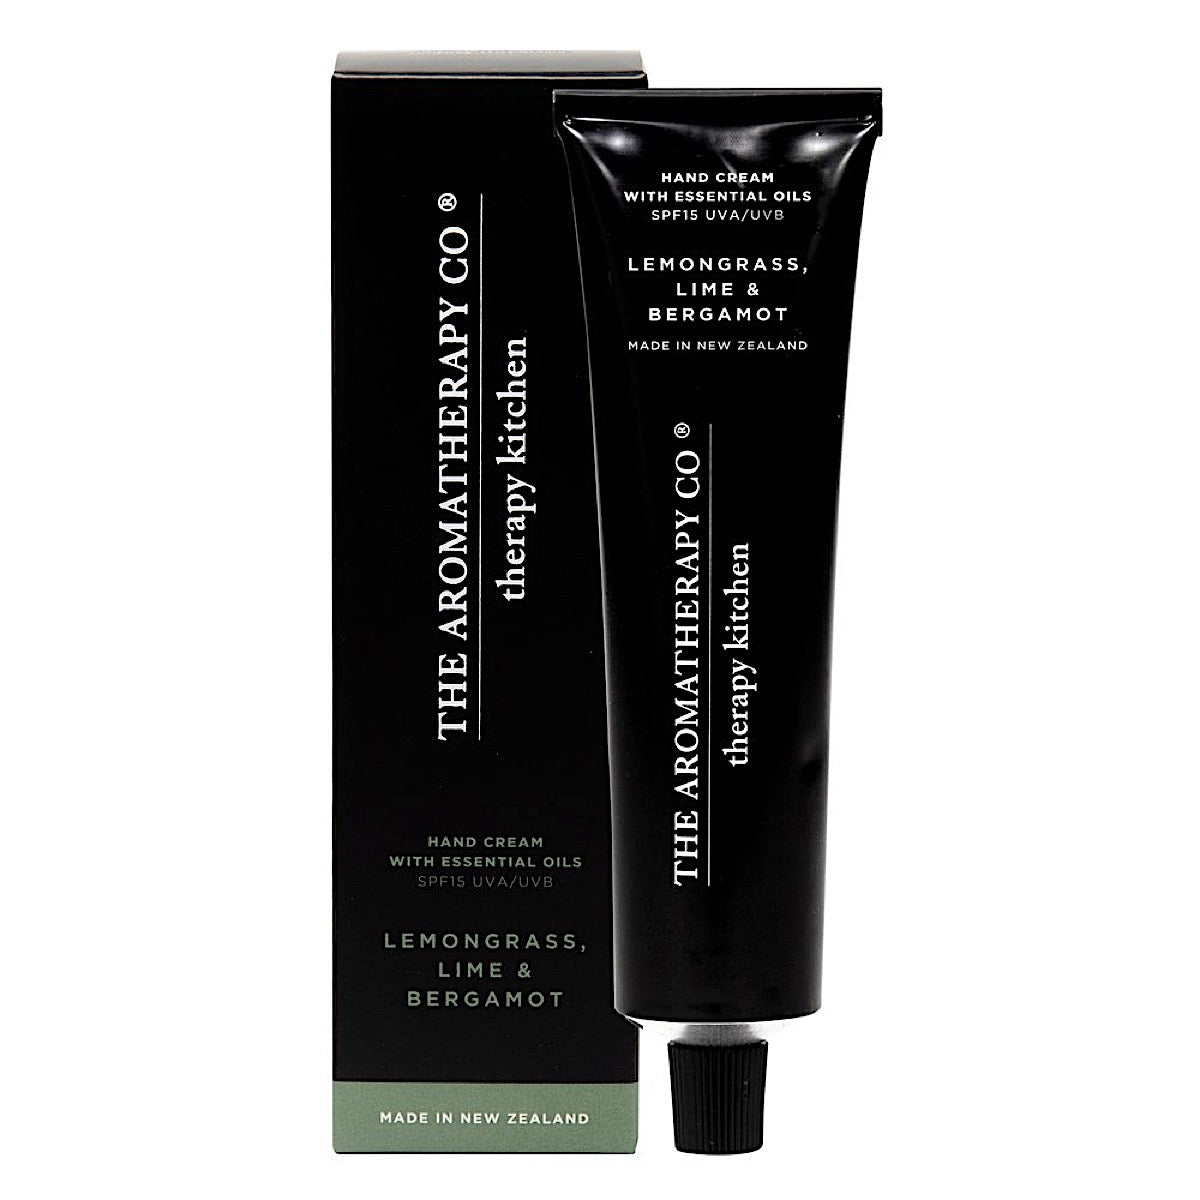 The Aromatherapy Co Therapy Kitchen Lemongrass, Lime & Bergamot Hand Cream Tube at More Than Just A Gift